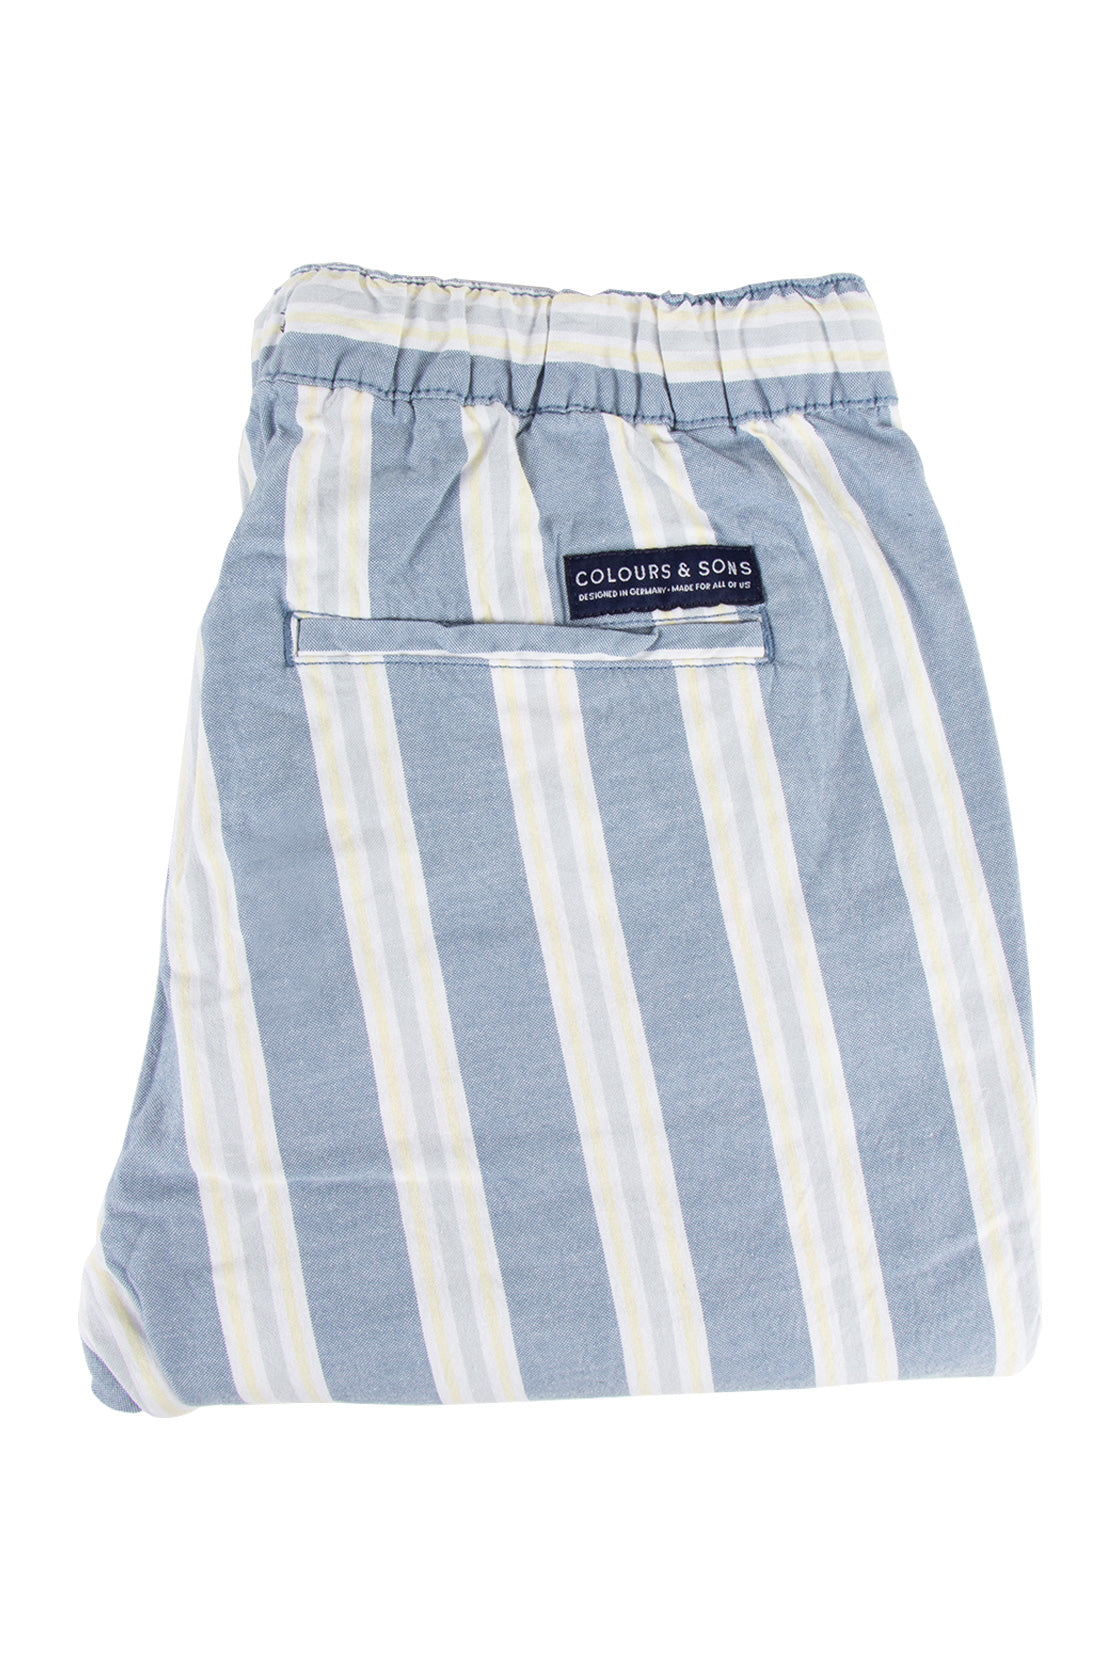 Colours & Sons Stripe Shorts Sunny